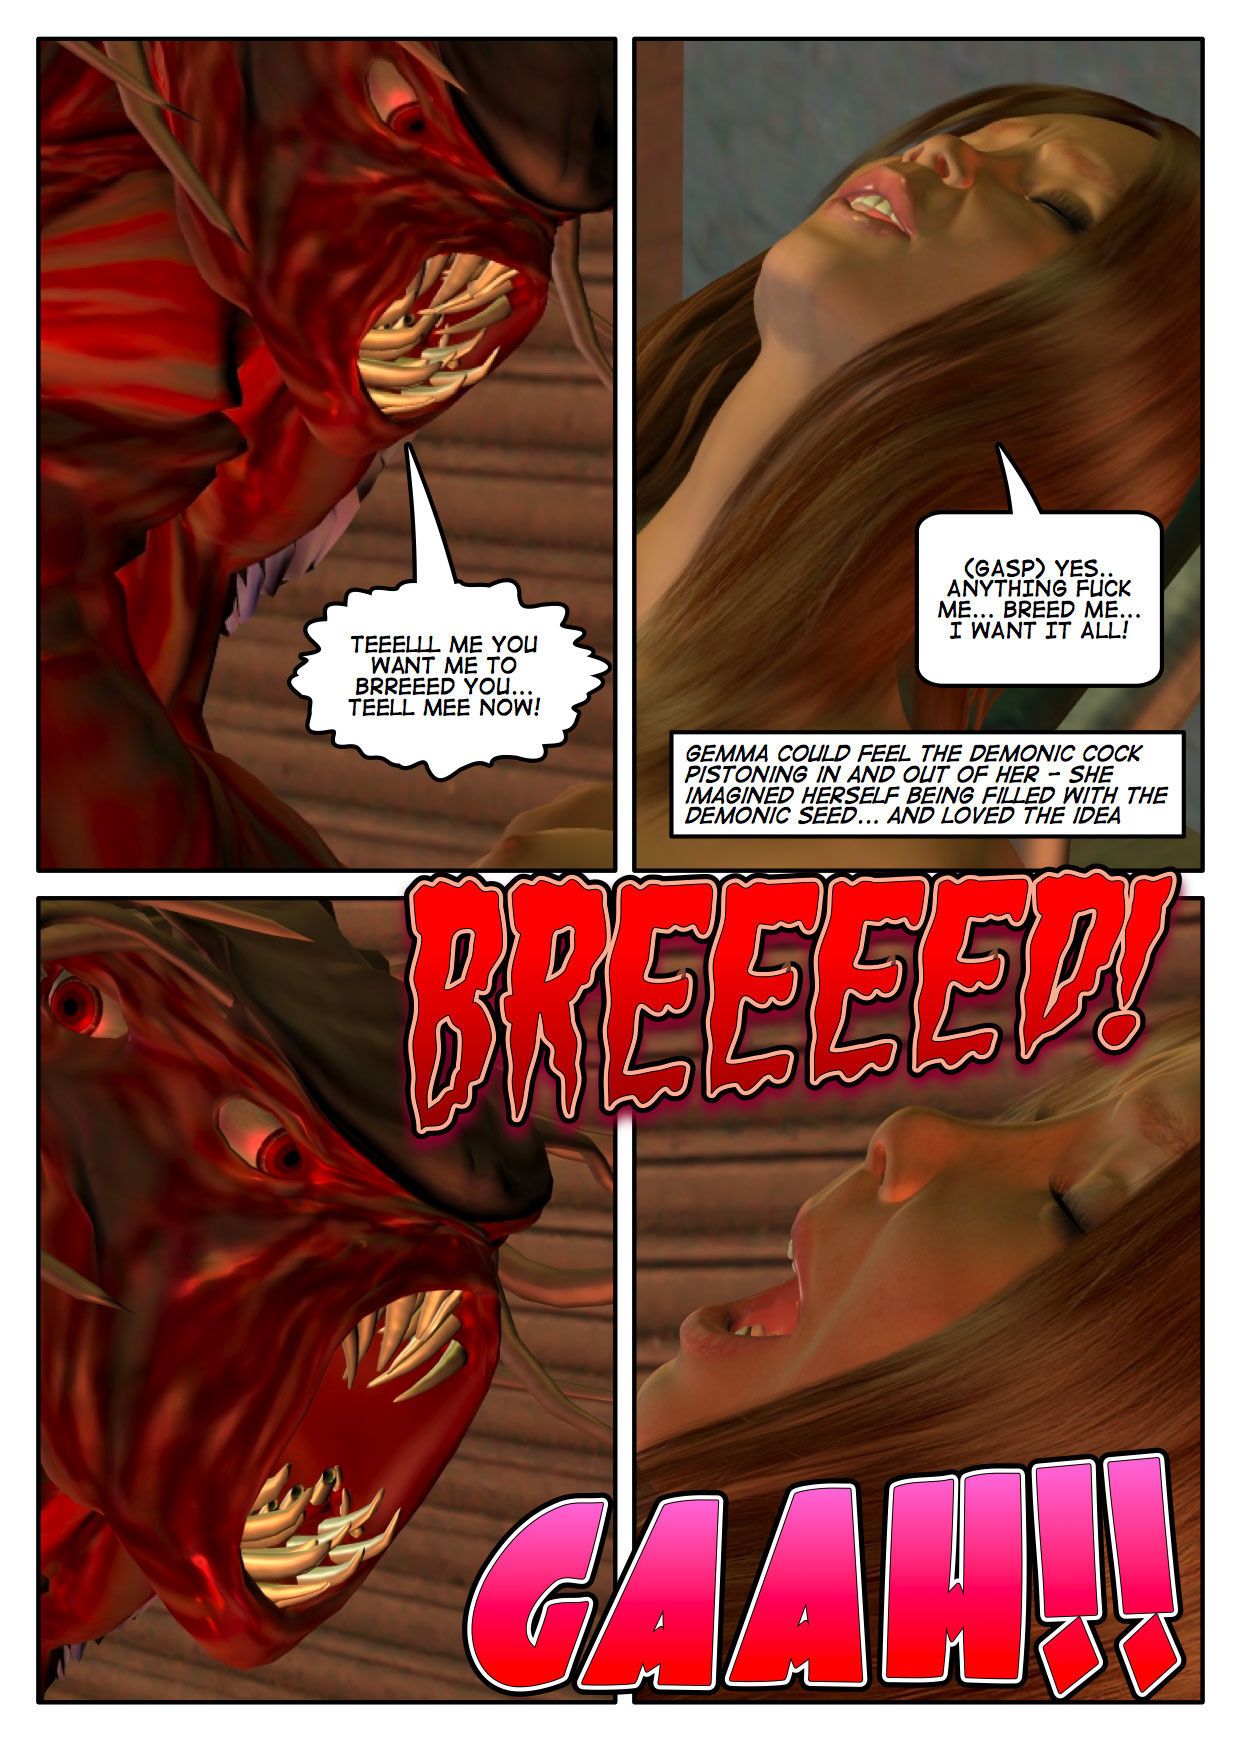 Slayer Issue 15 - part 2